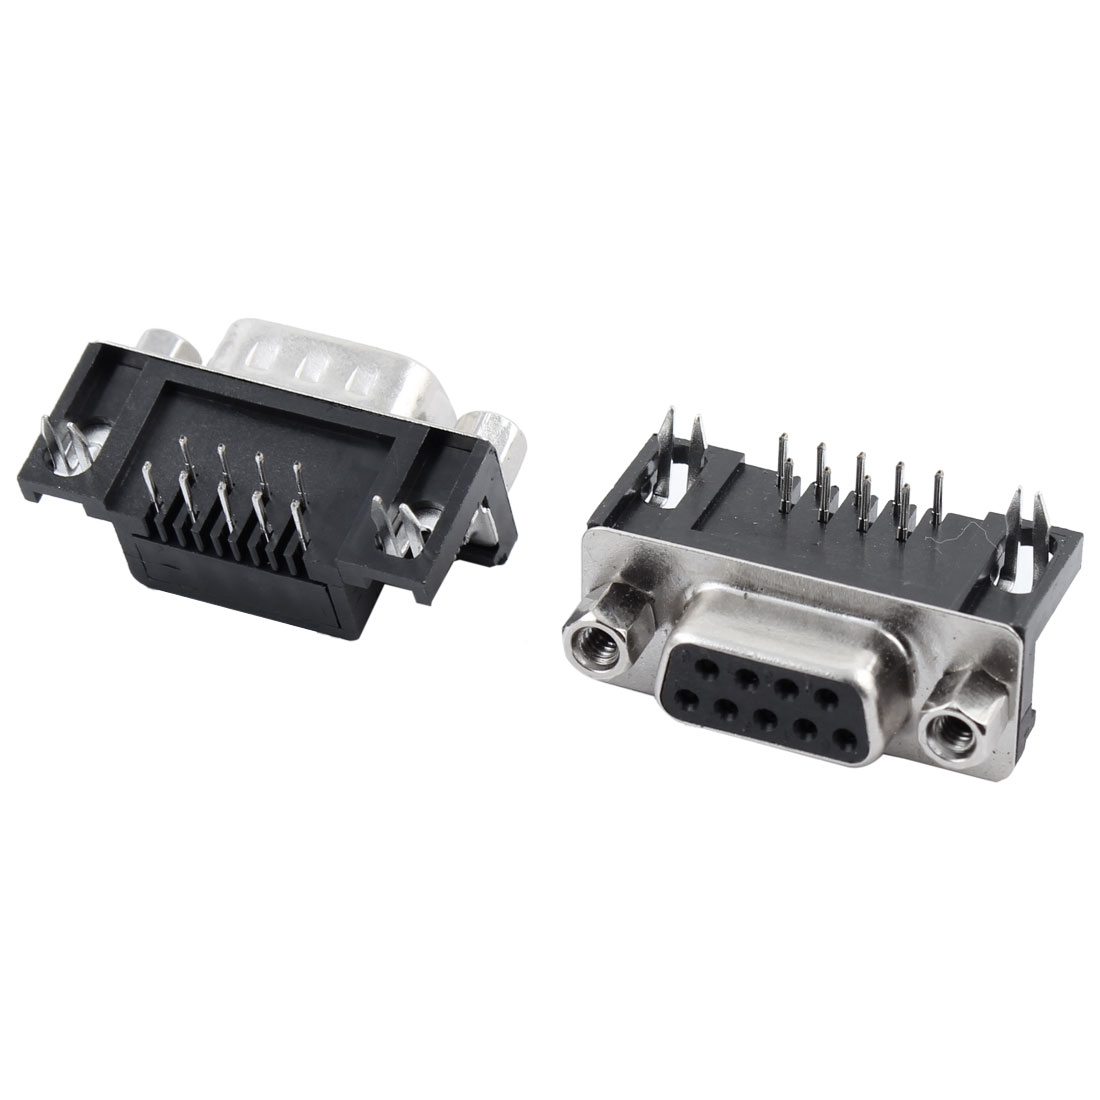 Unique Bargains 2pcs Right Angle DB9 9 Pin Female Male Connector Converter for PC